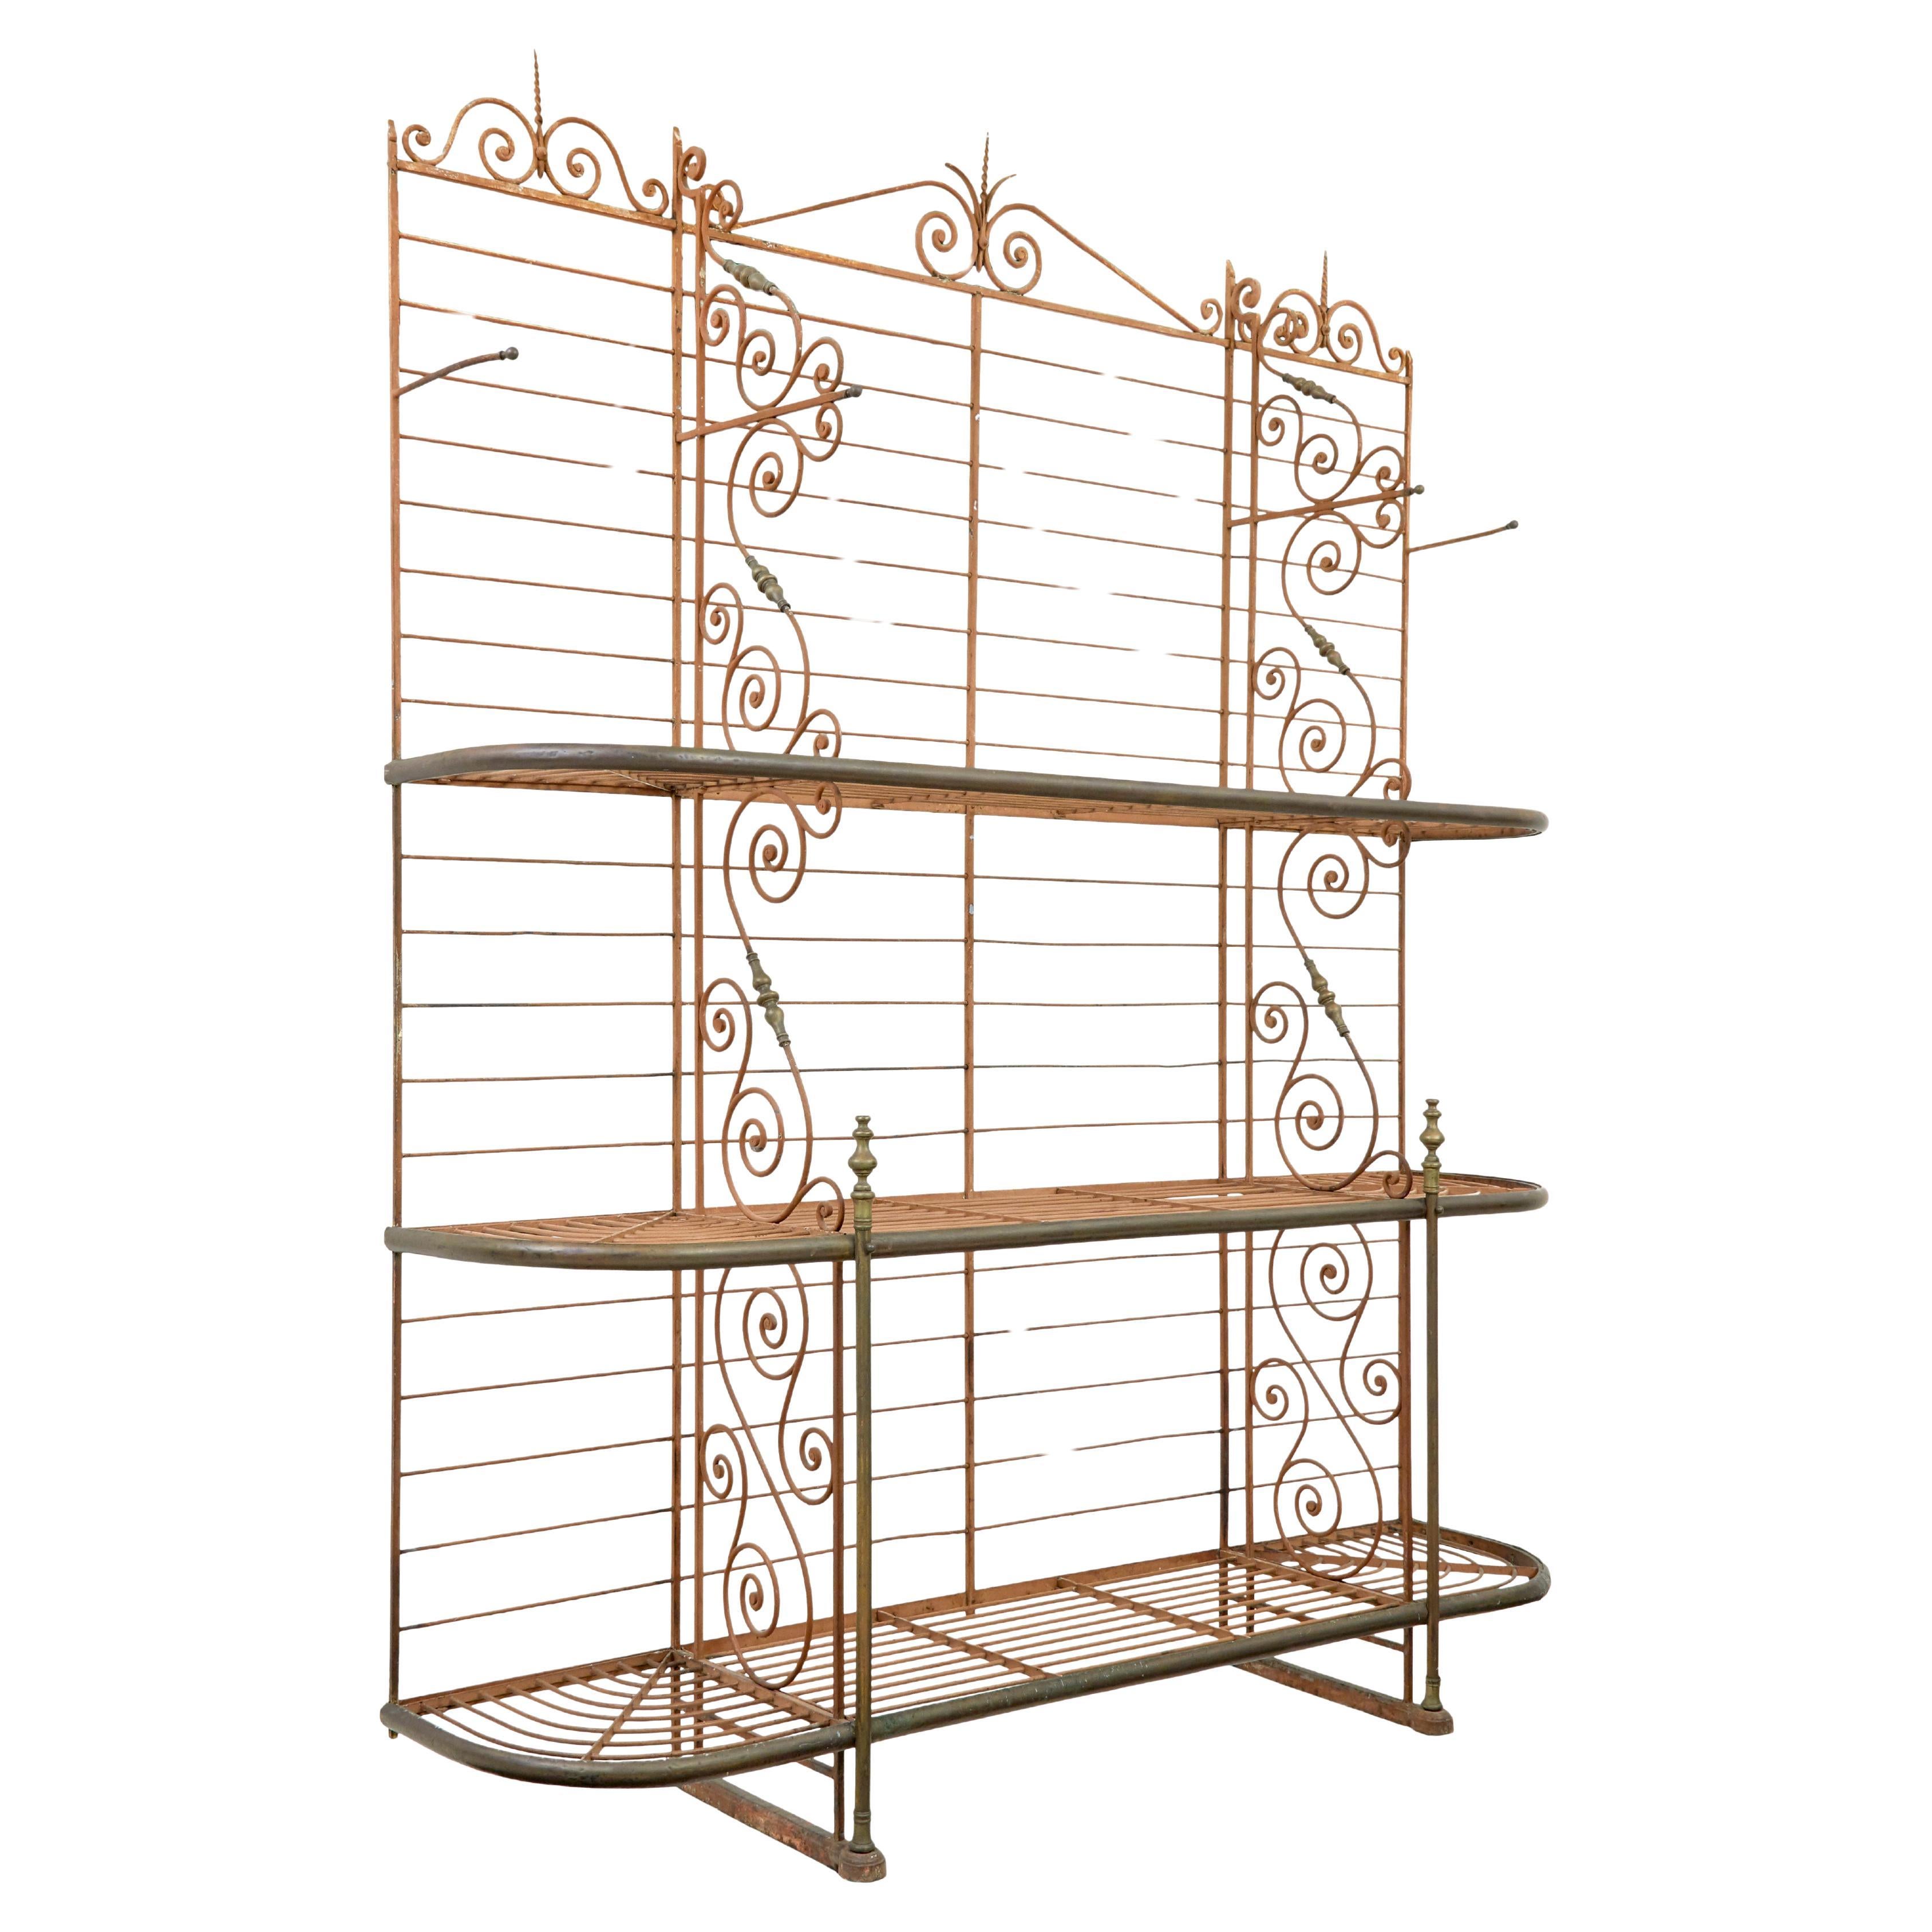 Early 20th century french Parisienne boulangers bread rack